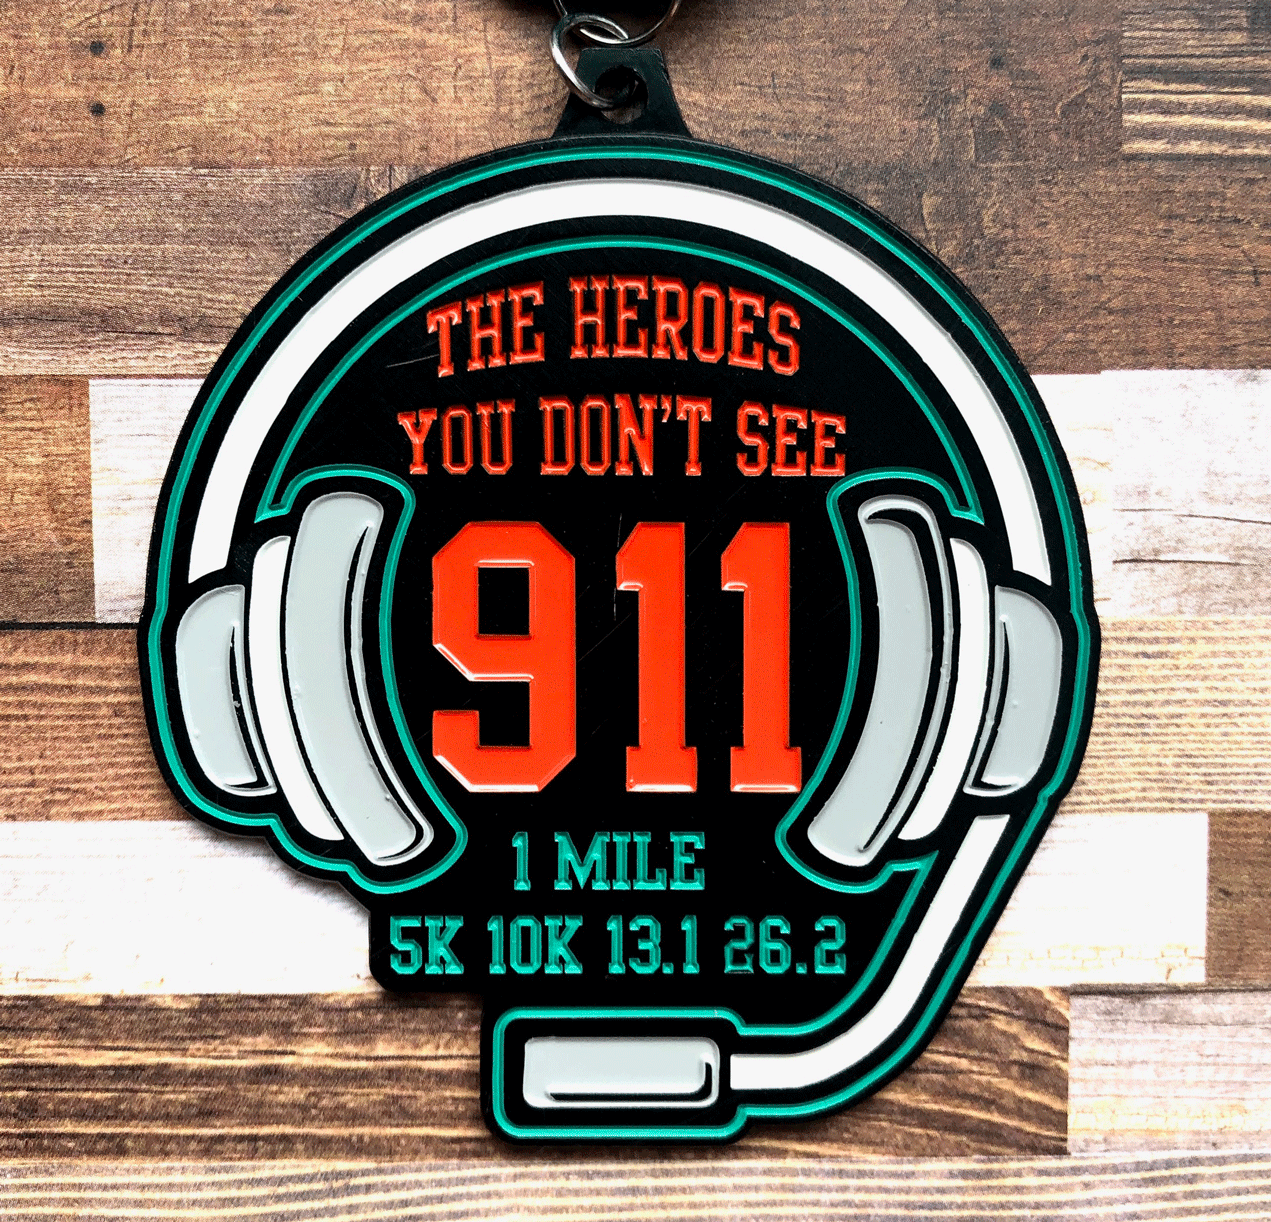 Only $9! The Heroes You Don't See 1 M 5K 10K 13.1 26.2 -Lansing